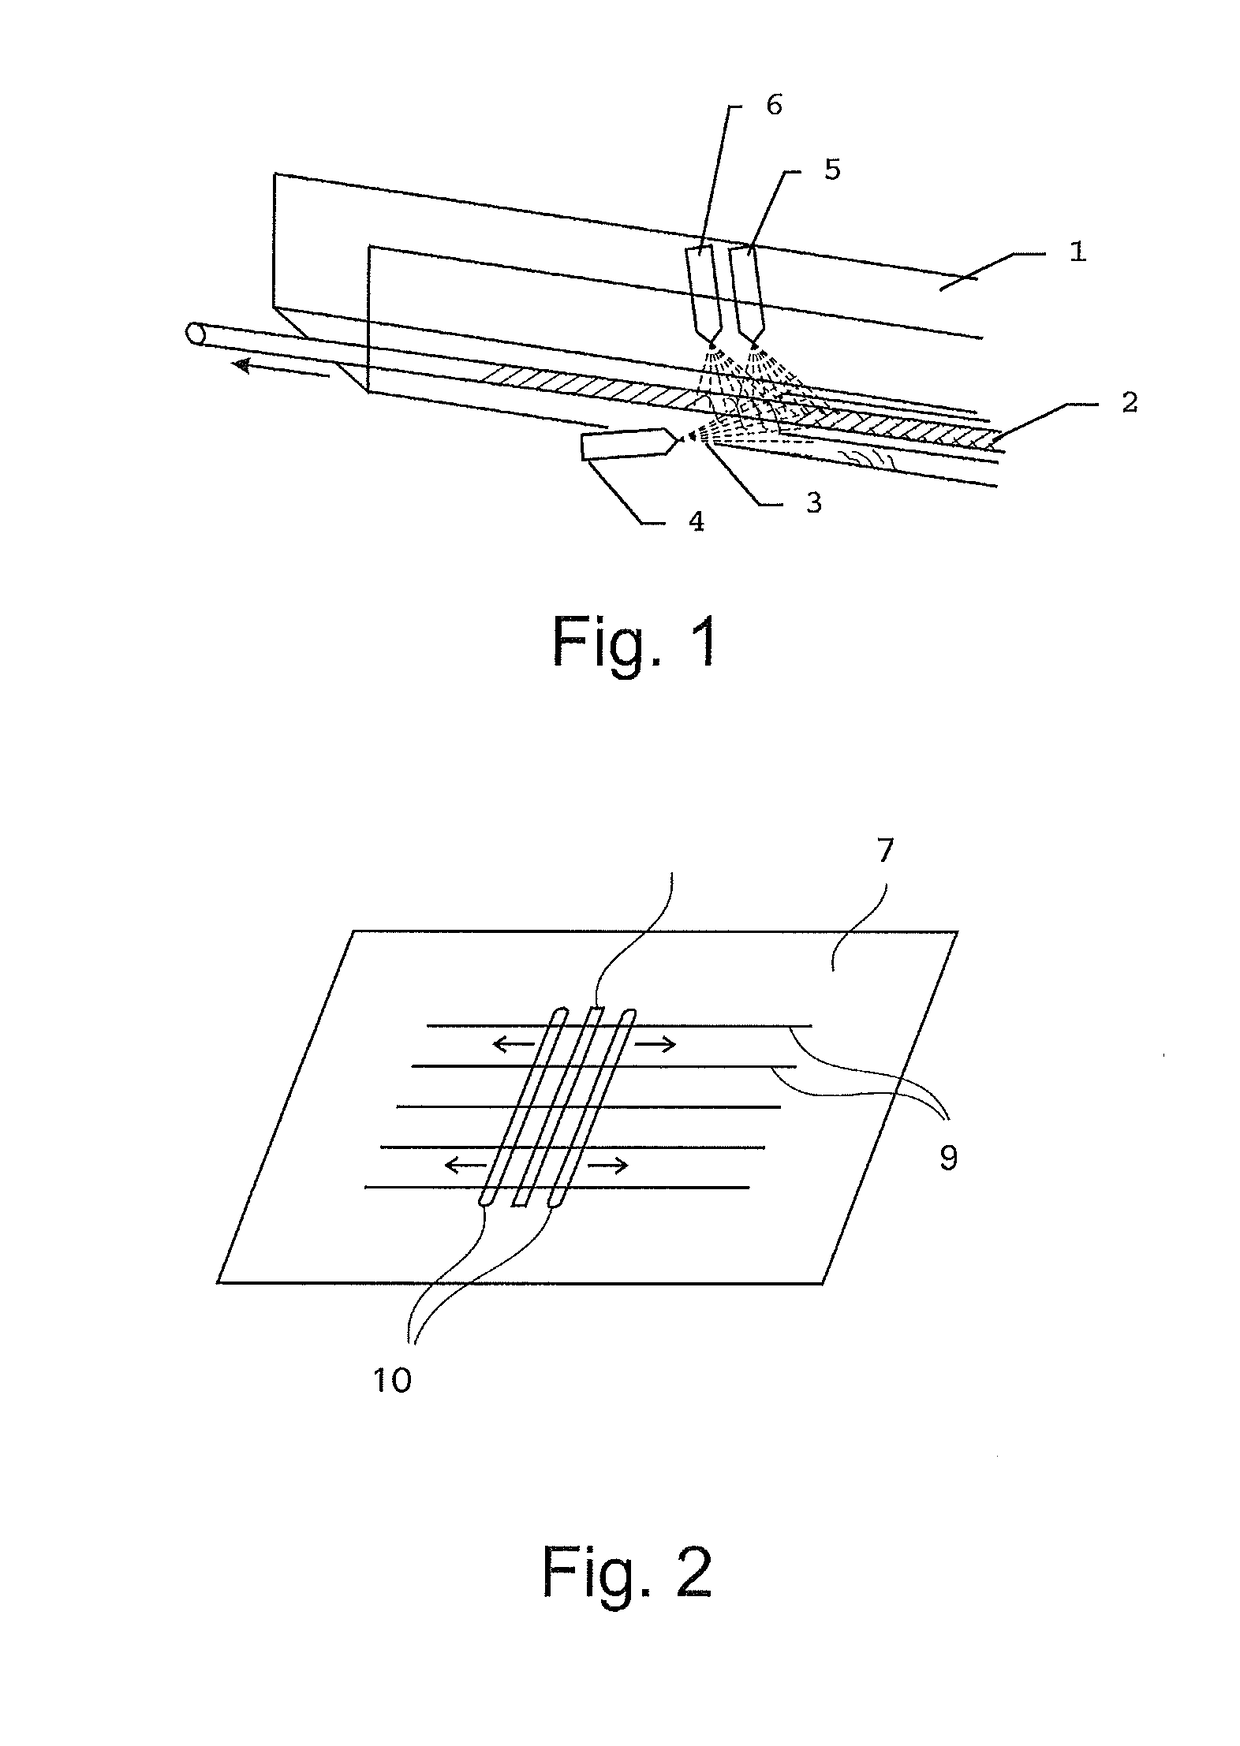 Method for obtaining fibers from at least one plant stem